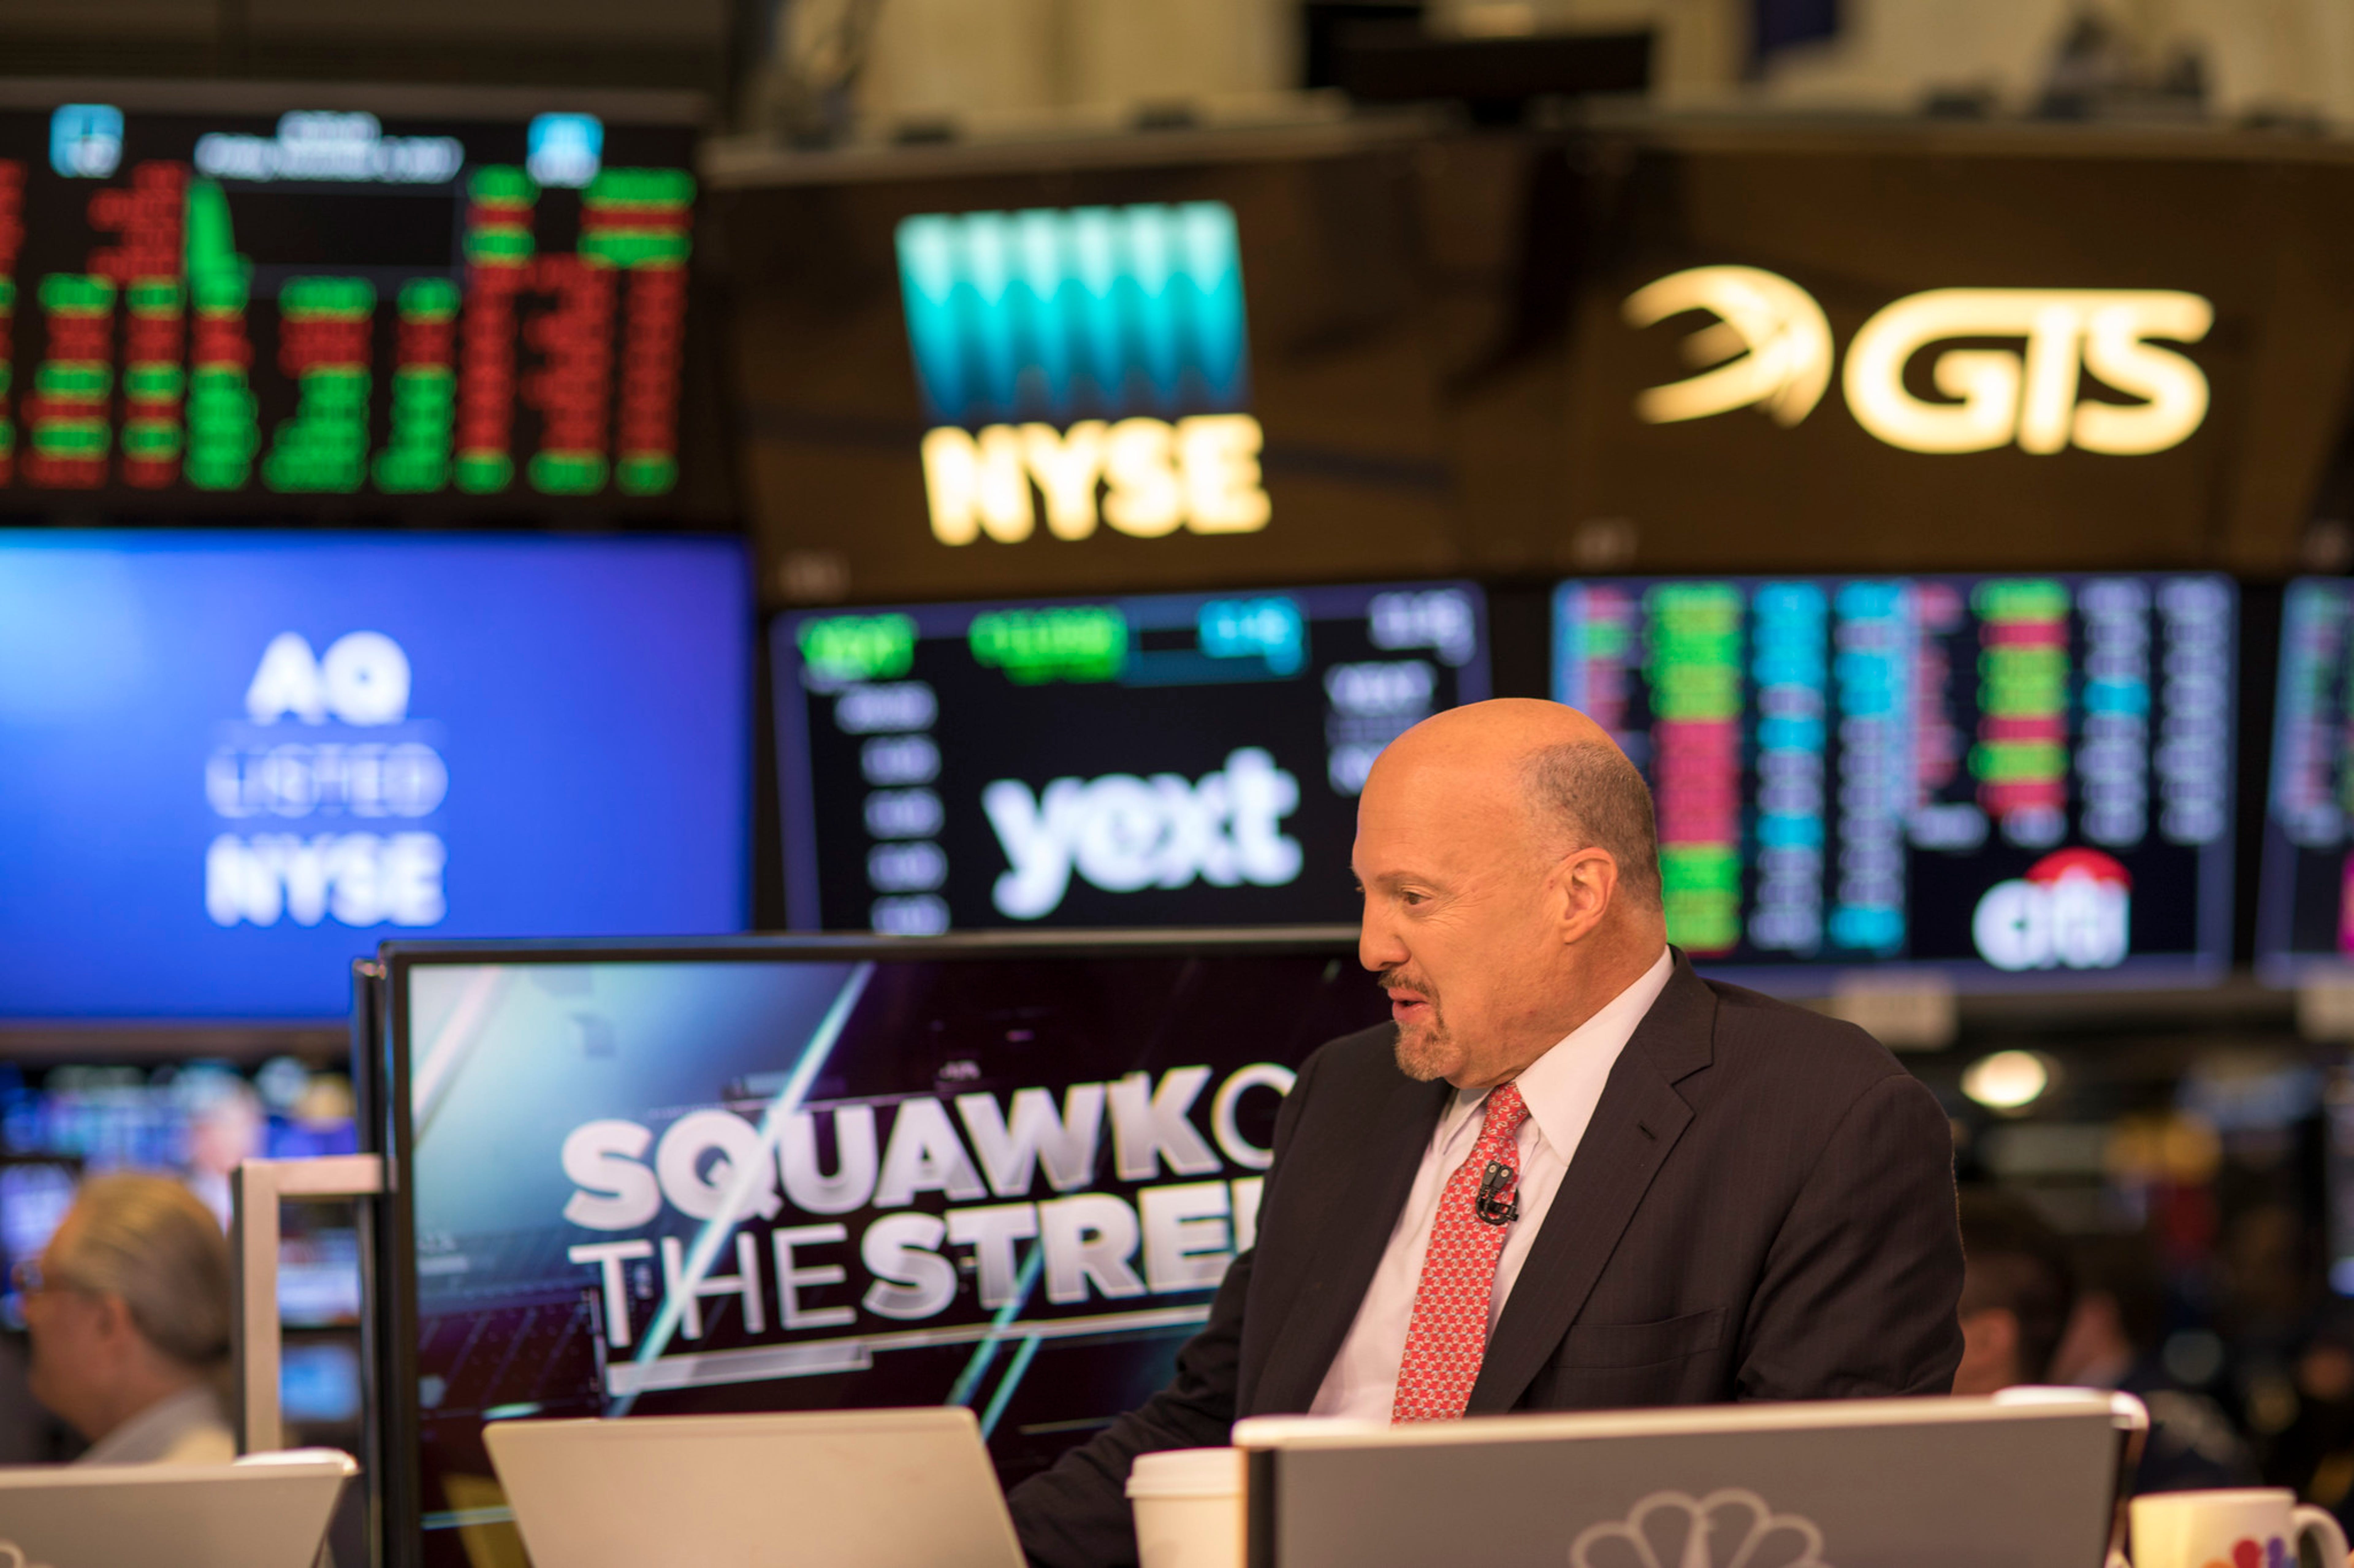 Jim Cramer Bashes Bed Bath &amp; Beyond: Why He Says Retailer Could &#39;Save Themselves,&#39; But Would &#39;Rather Sink The Ship&#39;